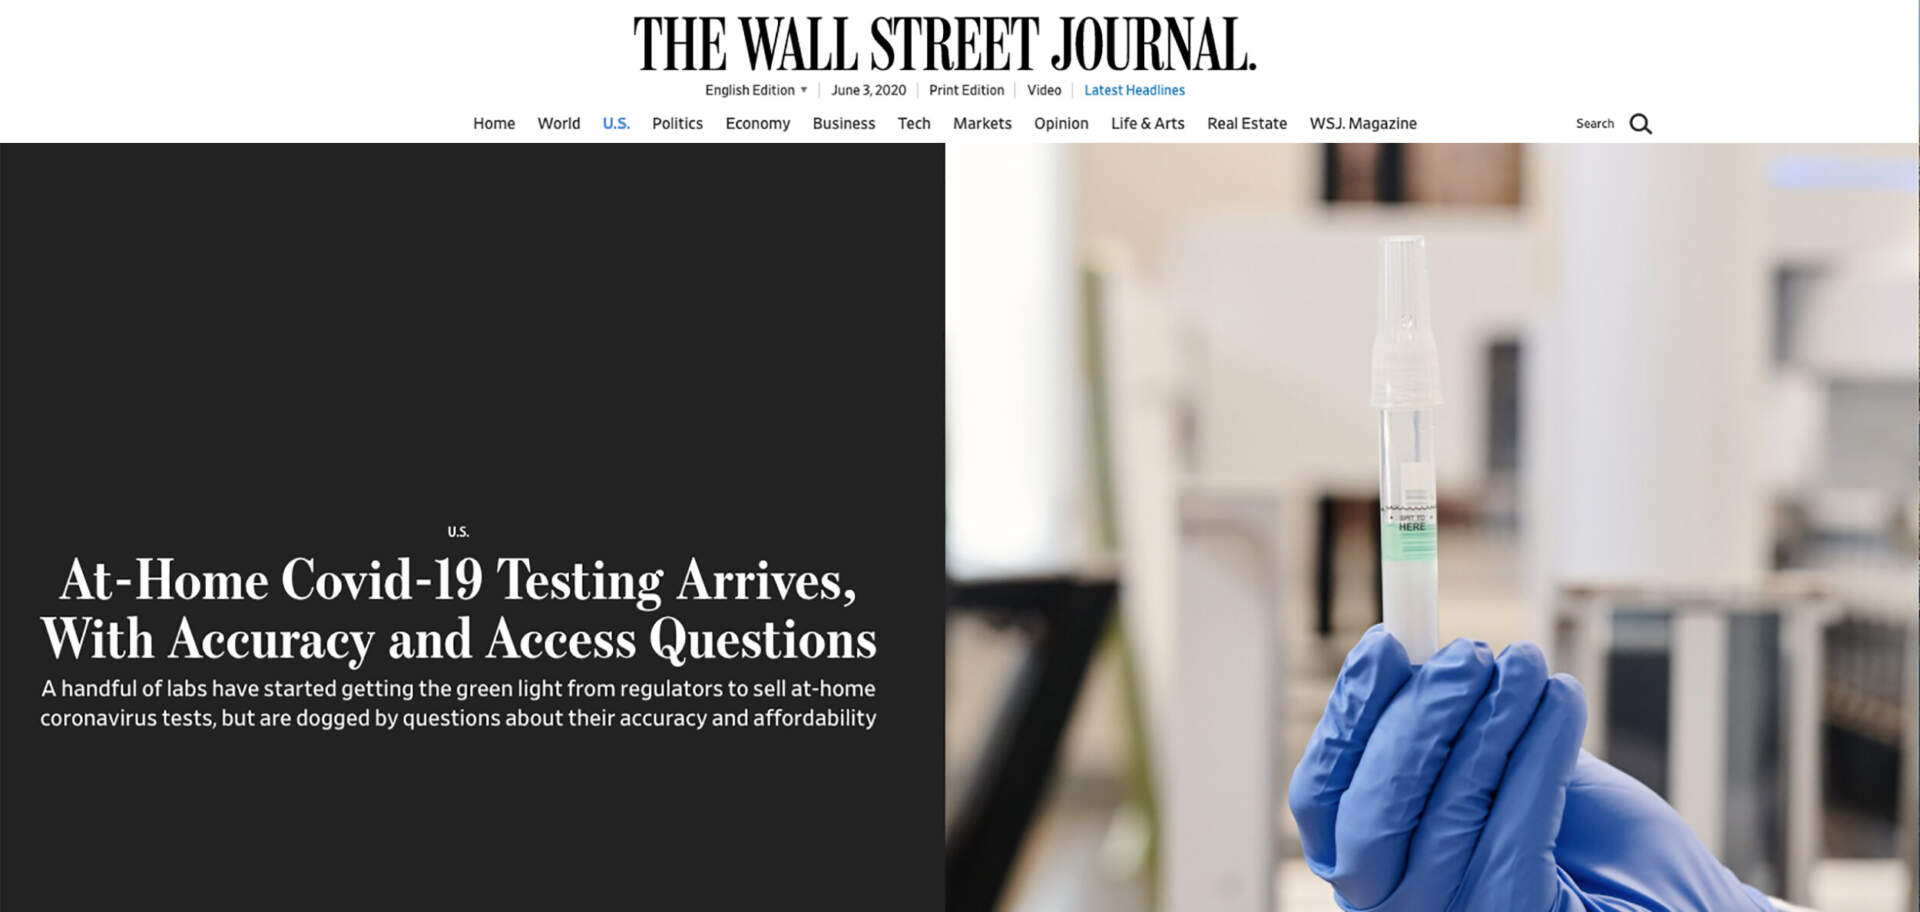 THE WALL STREET JOURNAL-At-Home COVID-19 Testing Arrives With Questions